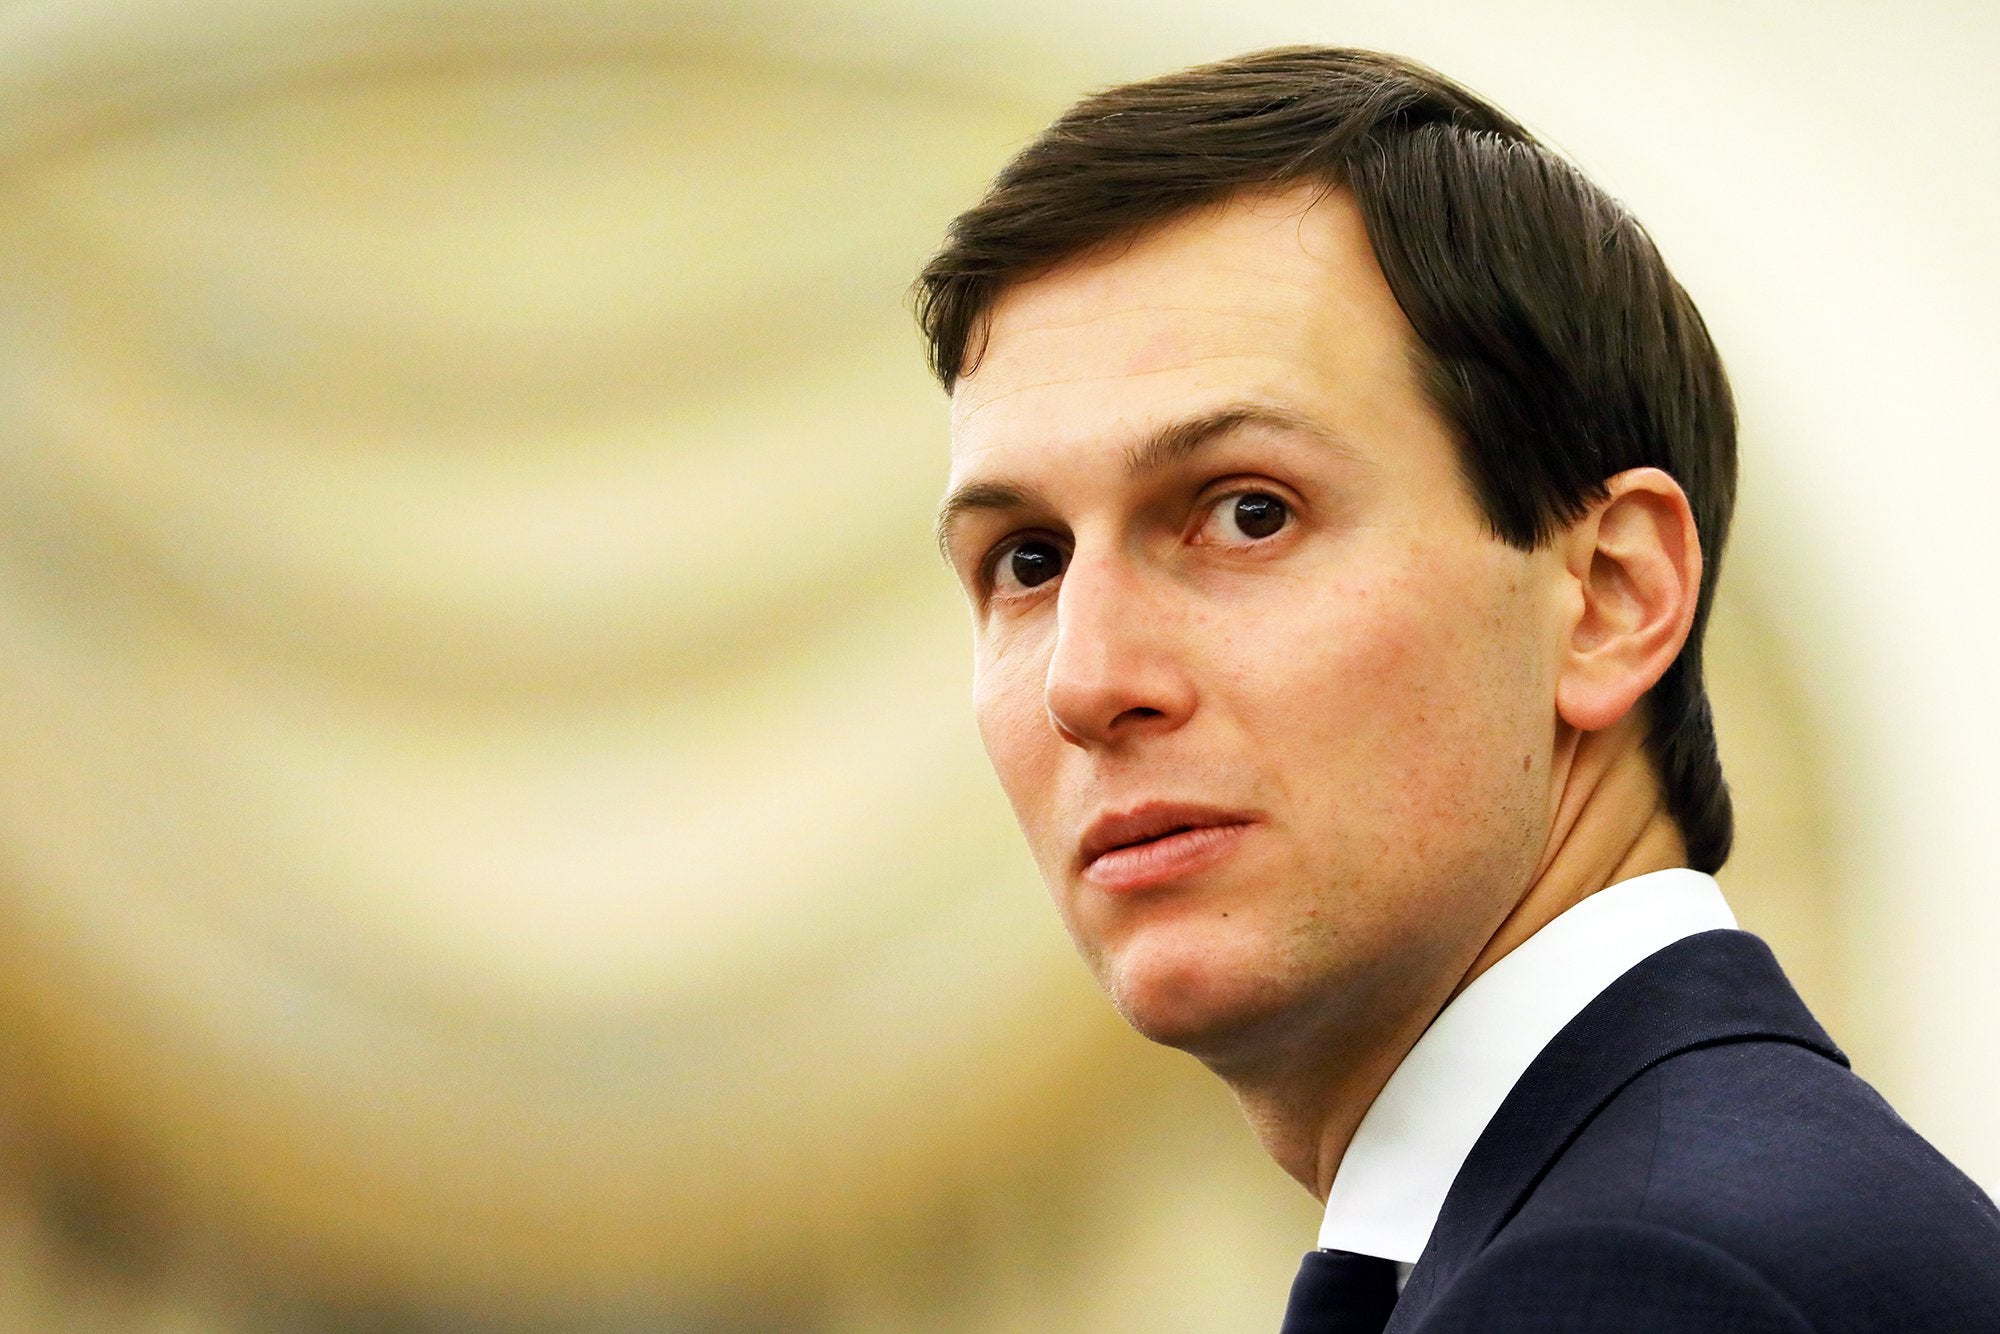 Democrats Want Jared Kushner to Address Reports that He Proposed a Secret Line With Russia